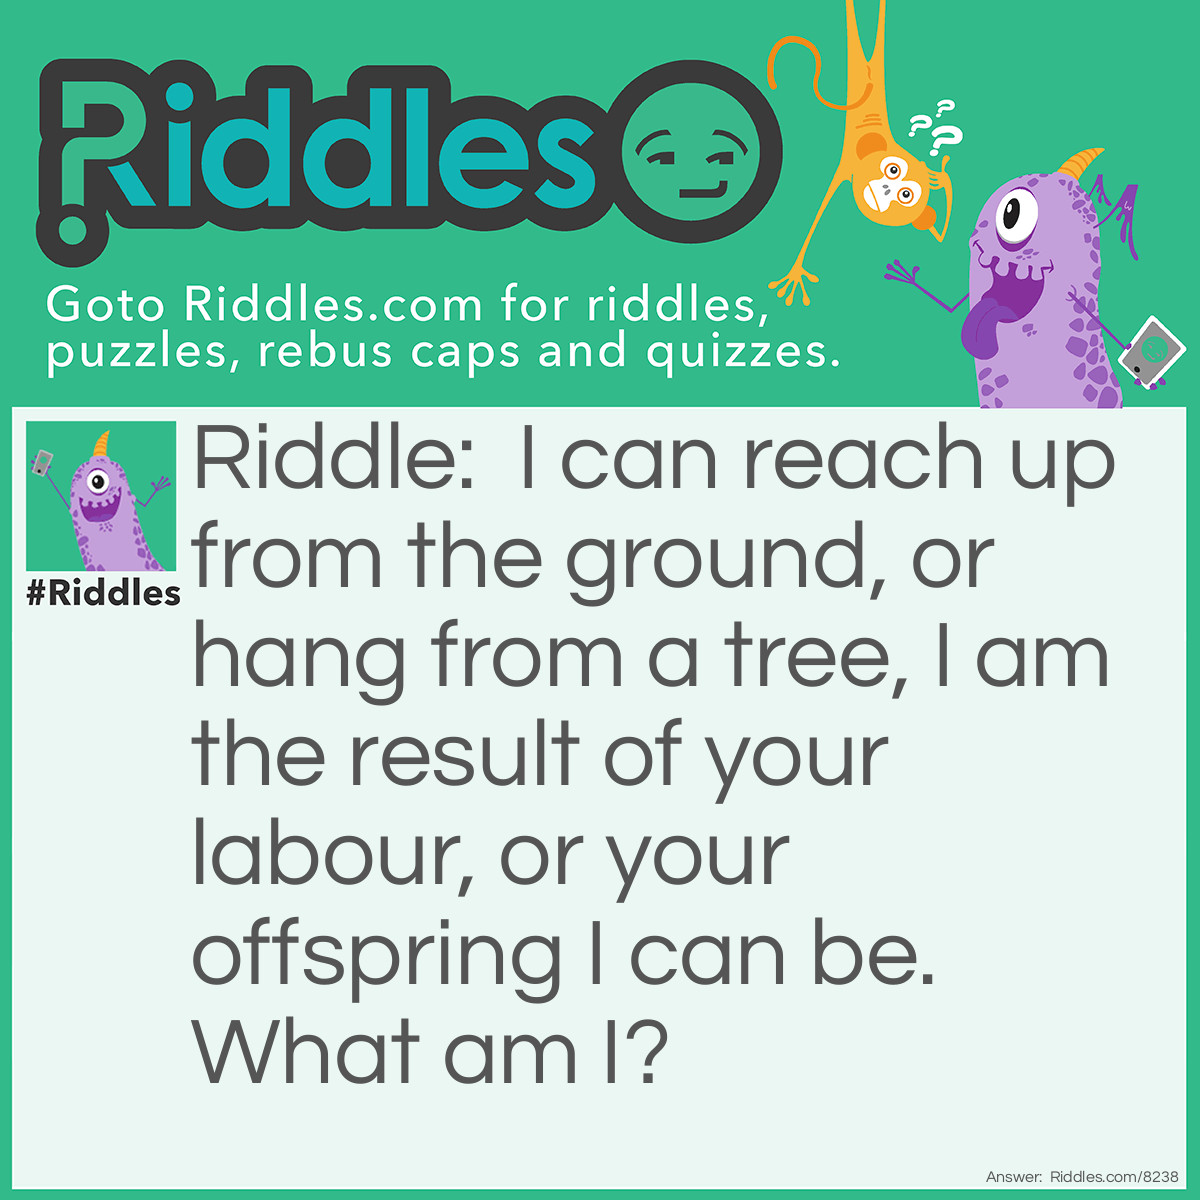 Riddle: I can reach up from the ground, or hang from a tree, I am the result of your labour, or your offspring I can be. What am I? Answer: Fruit.